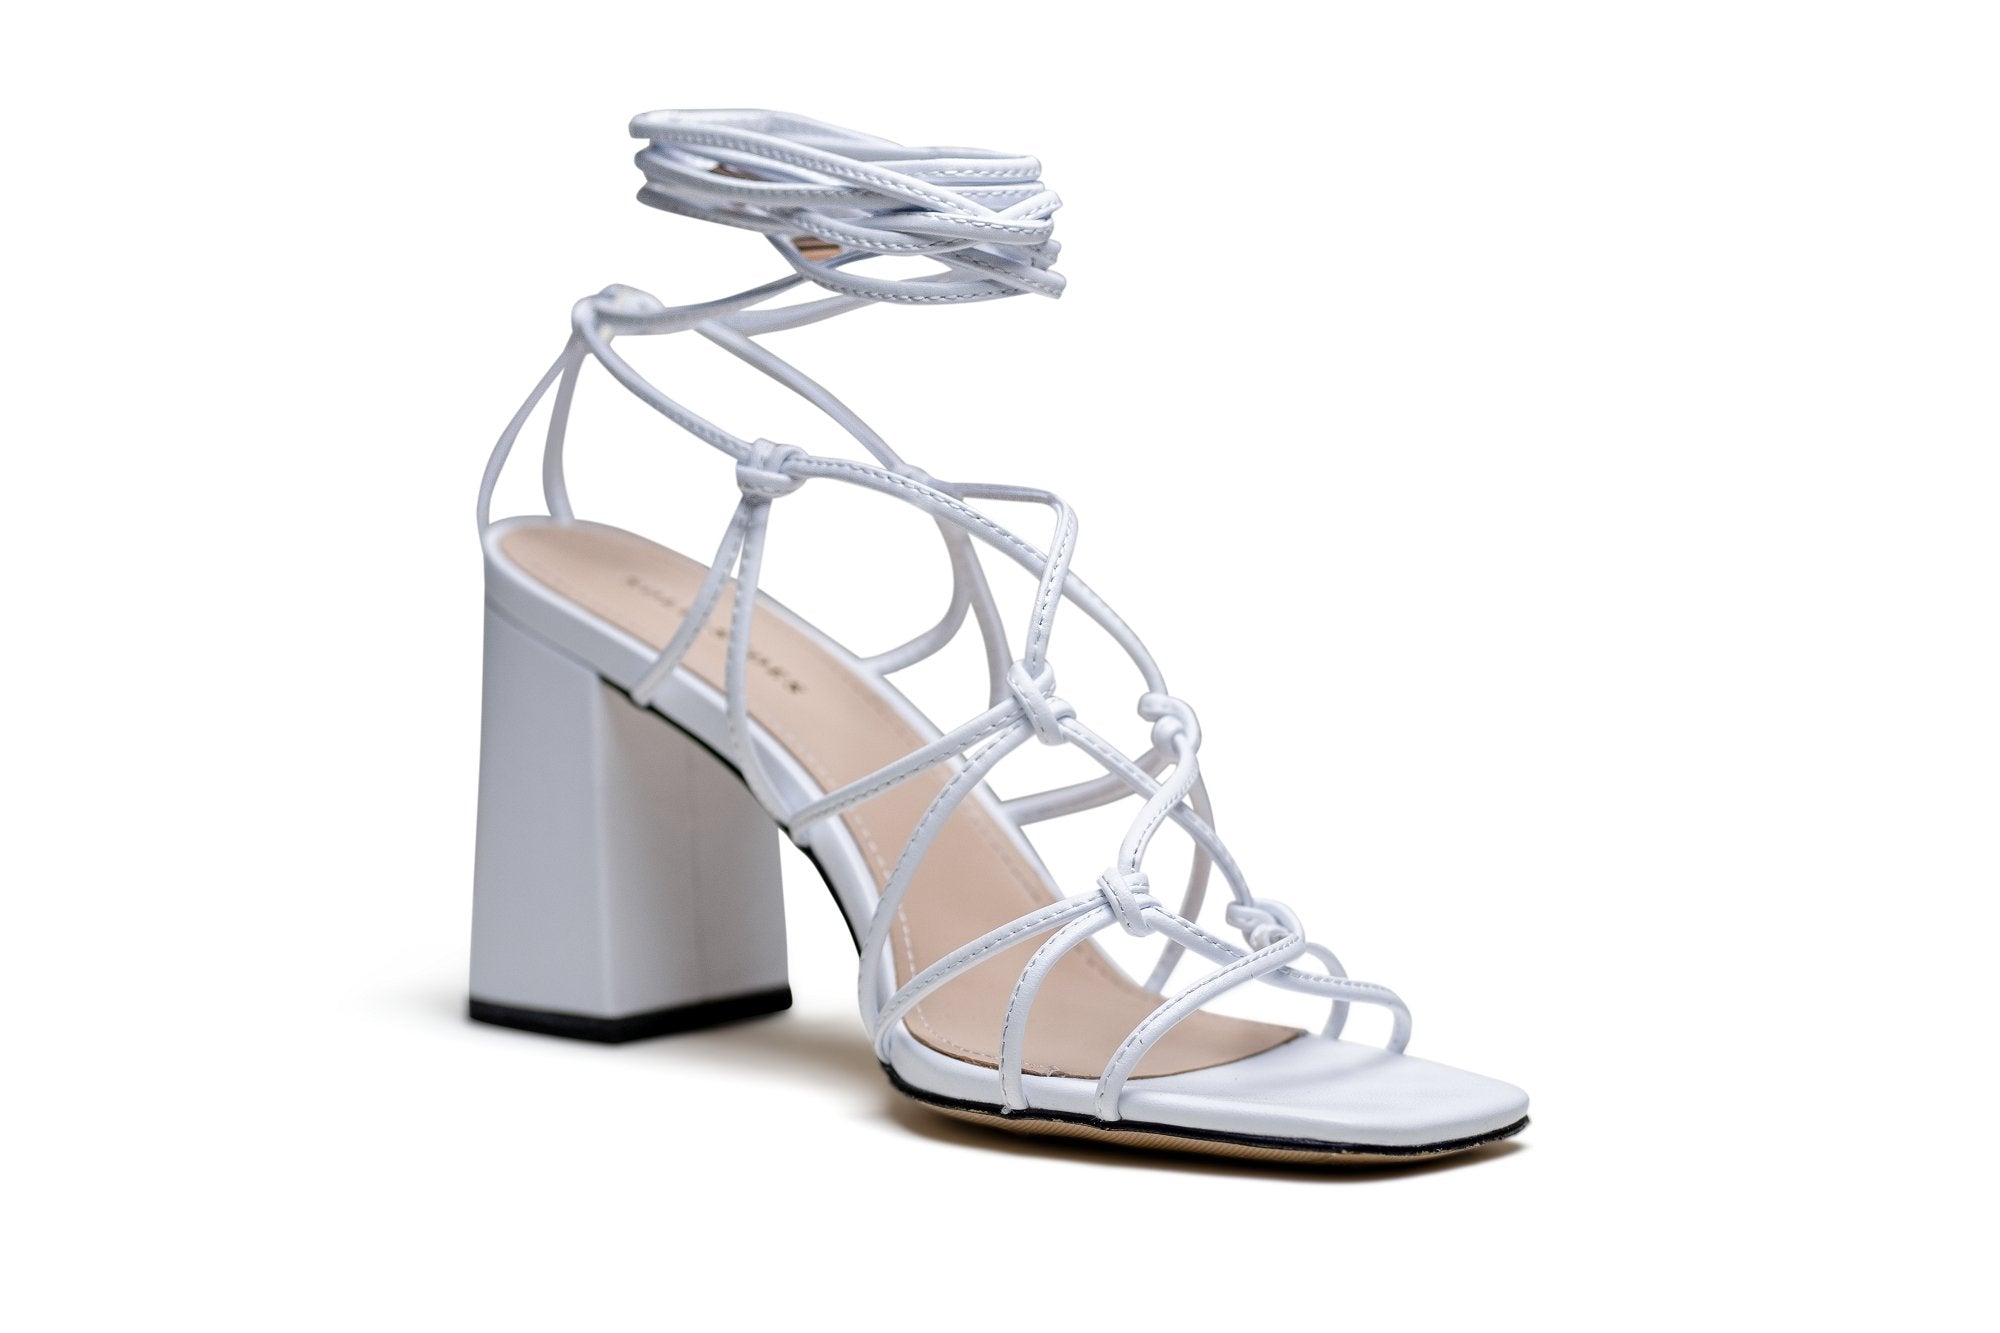 SAMPLE Eloise Strappy Sandal White by Sole Shoes NZ Eloise-SW